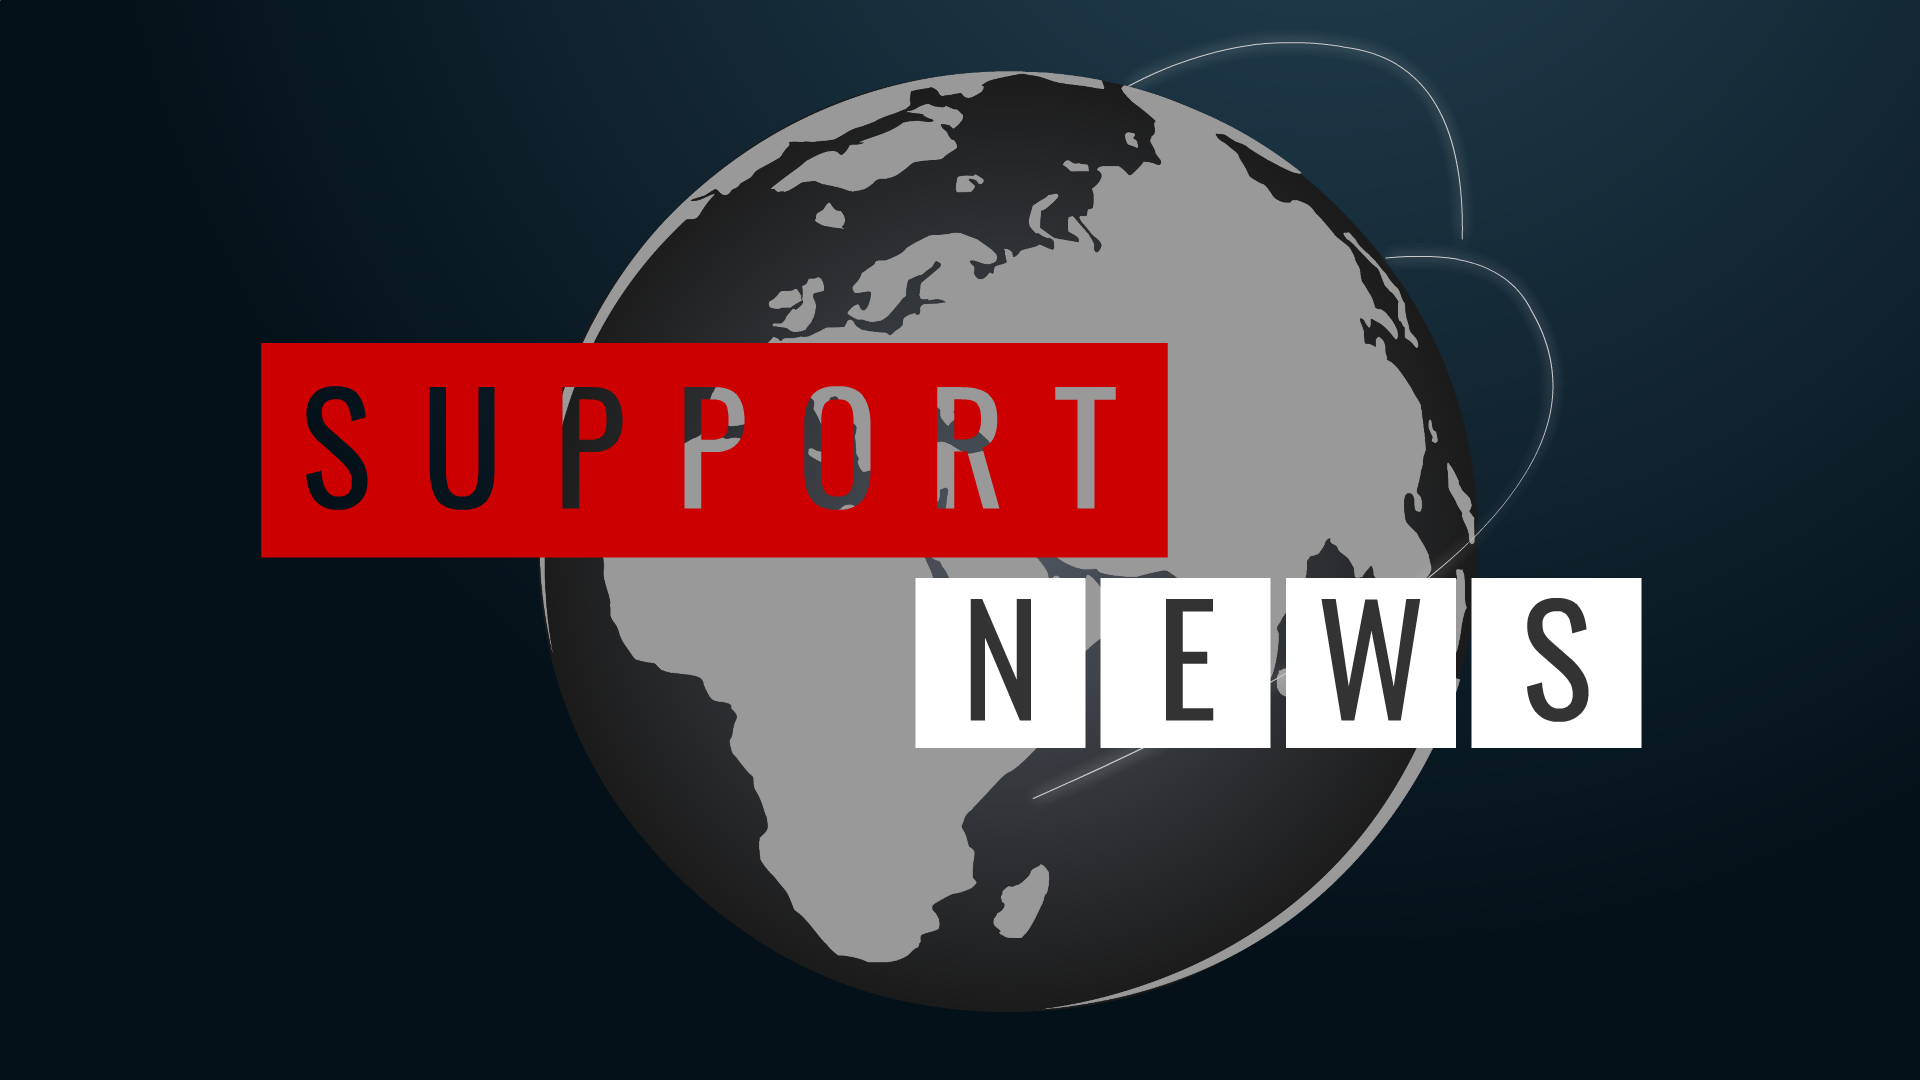 Support News